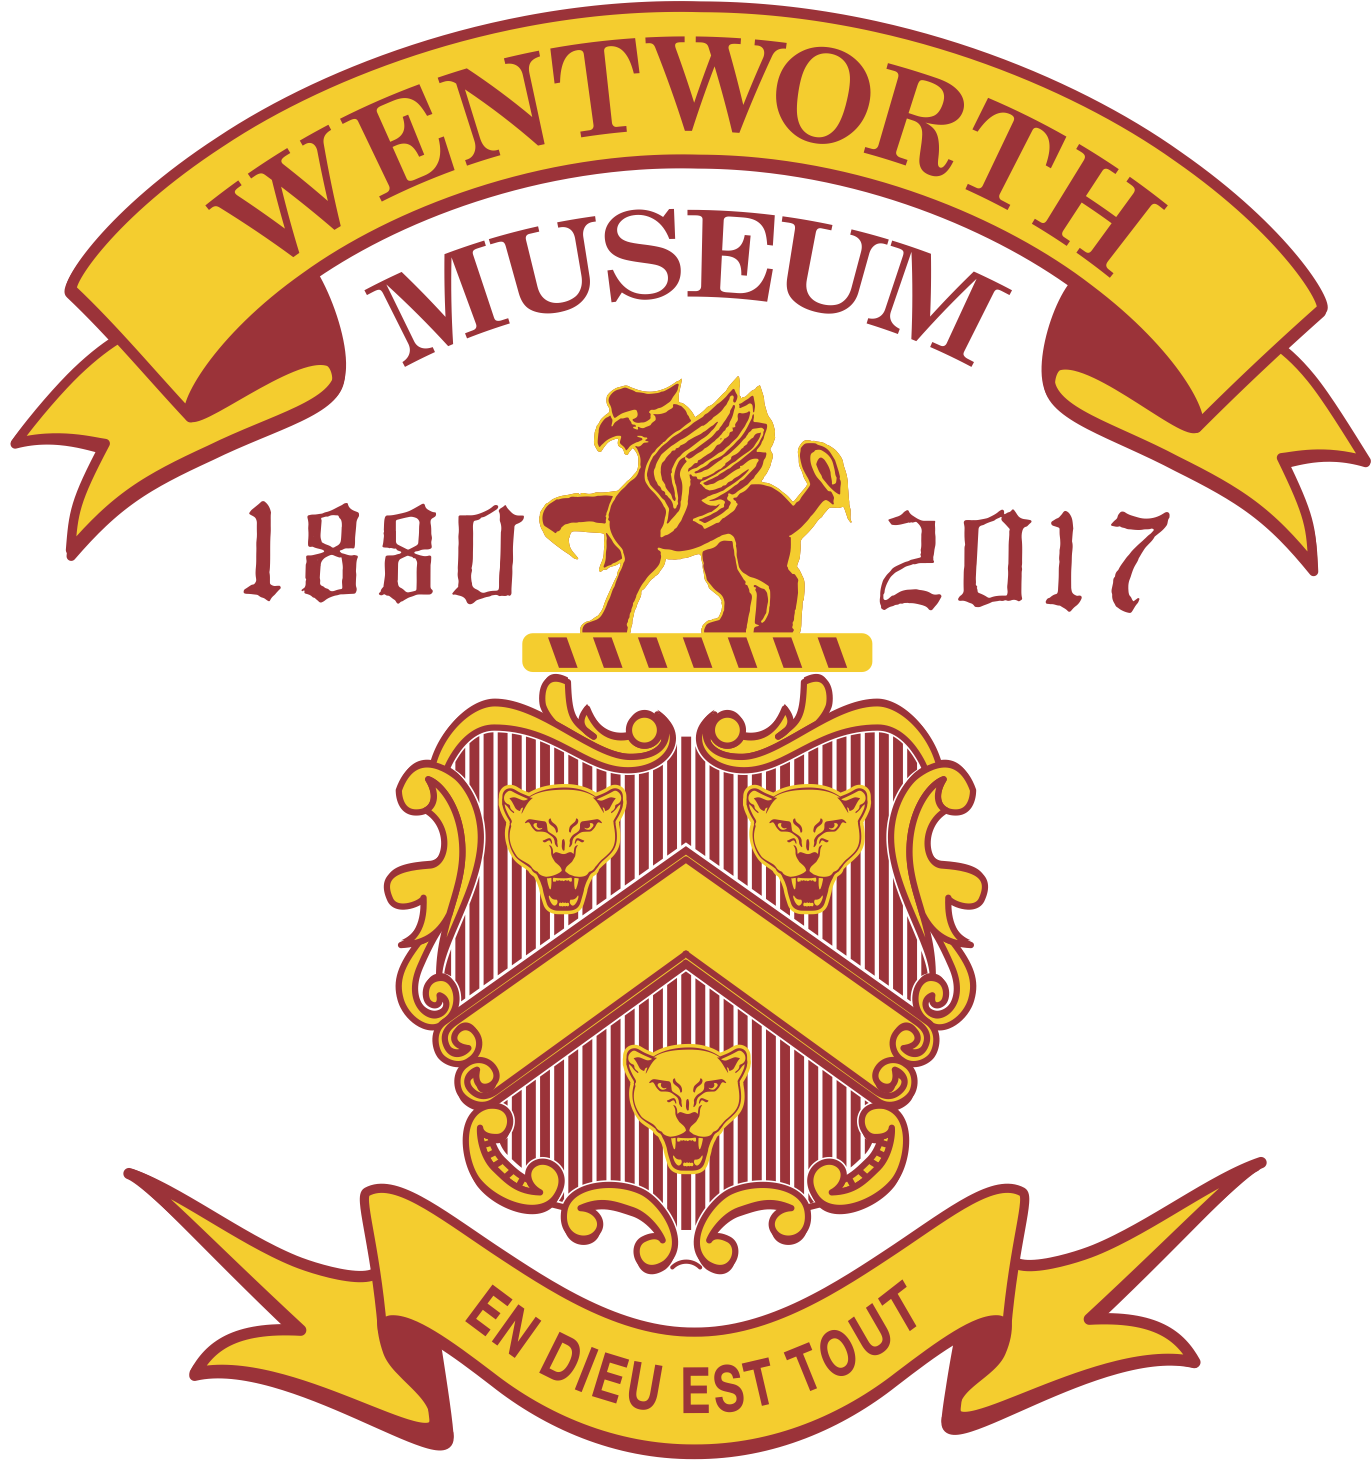 Wentworth Military Academy Museum, Inc.